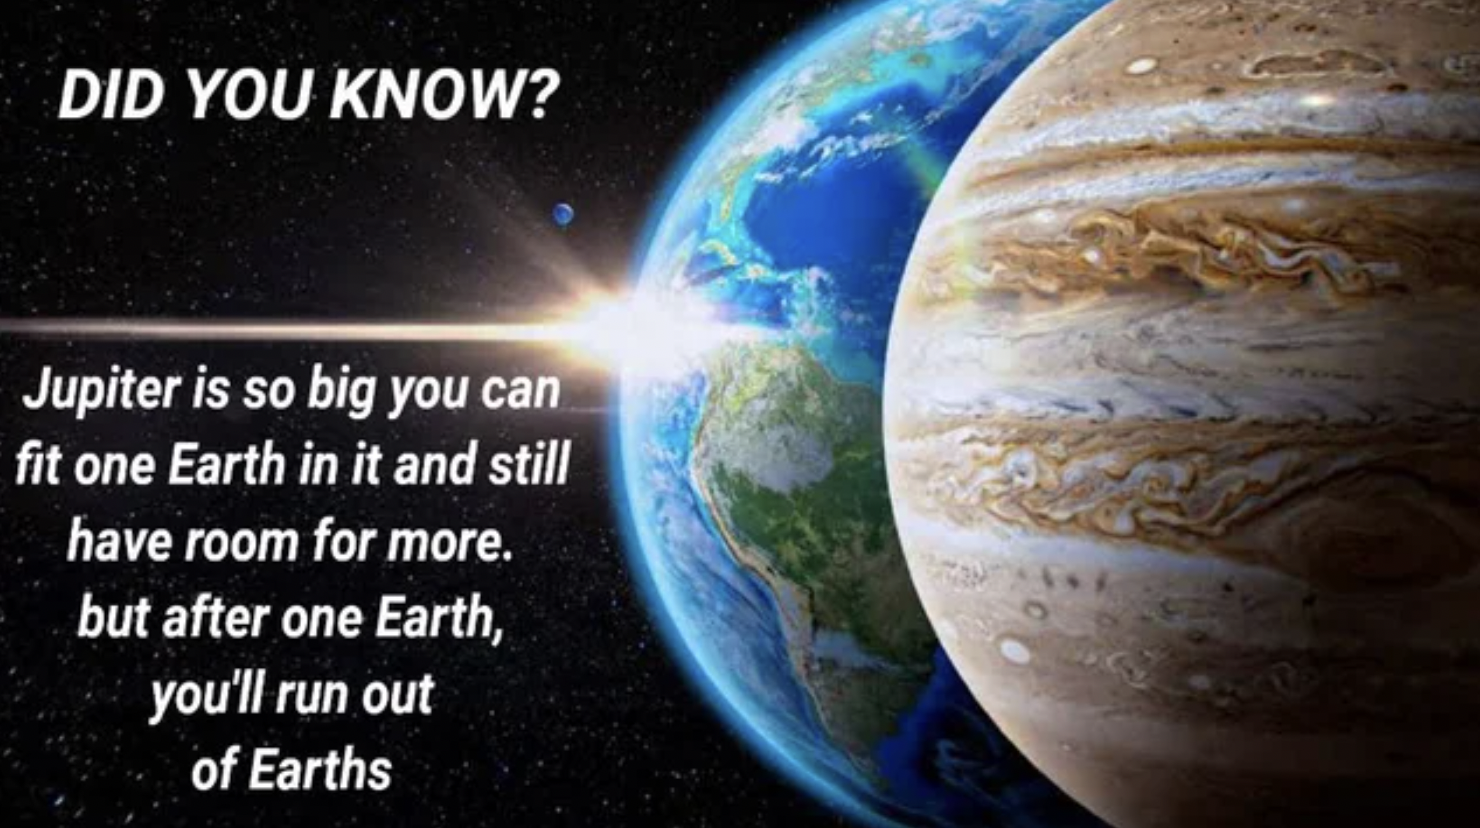 Memes That Technically Tell the Truth - planets and moons - Did You Know? Jupiter is so big you can fit one Earth in it and still have room for more. but after one Earth, you'll run out of Earths